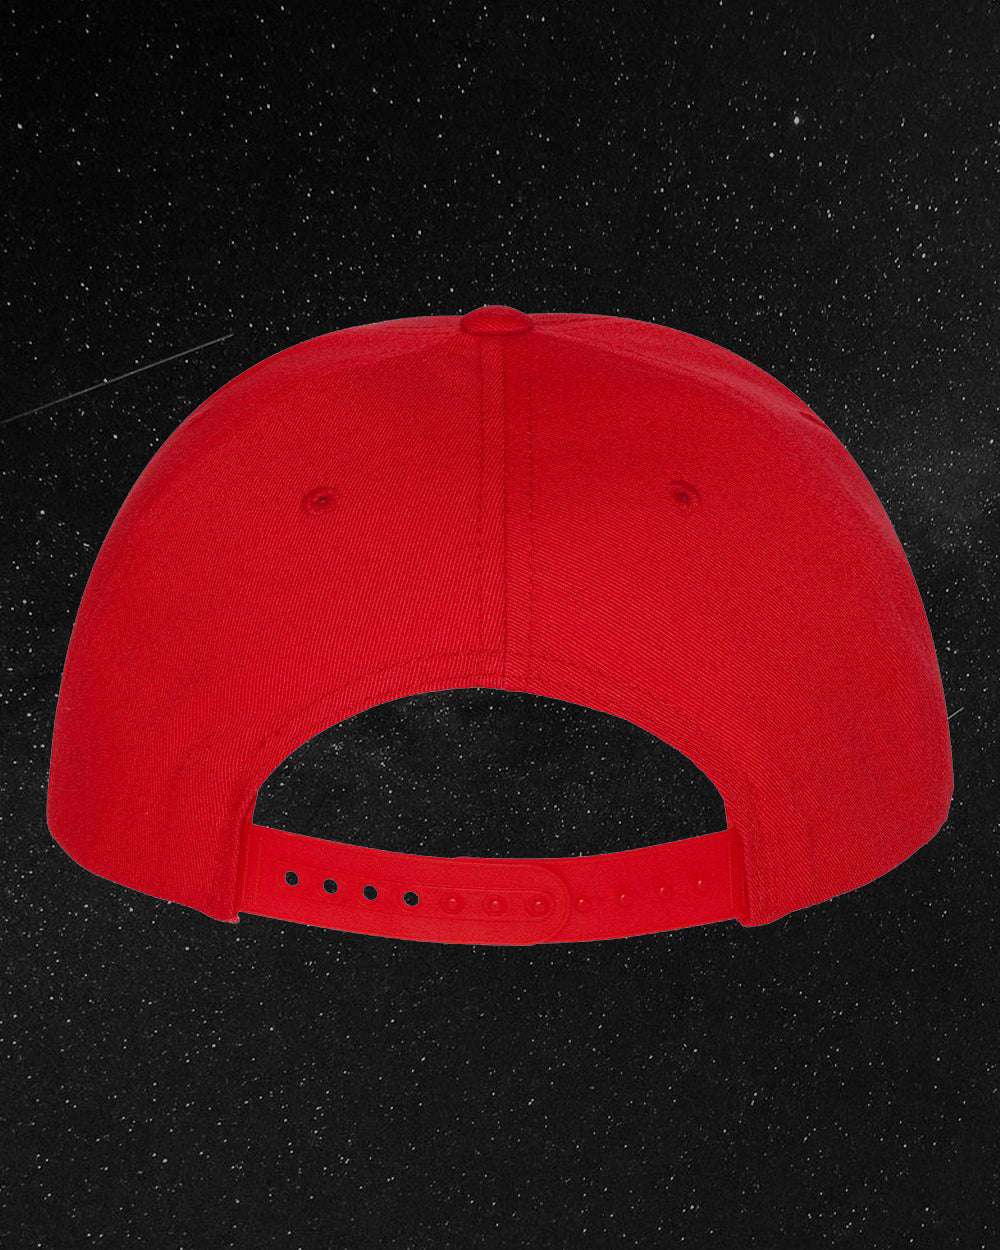 ATR | STREETWEAR FOR THE STRIVERS - Red Snapback Hat